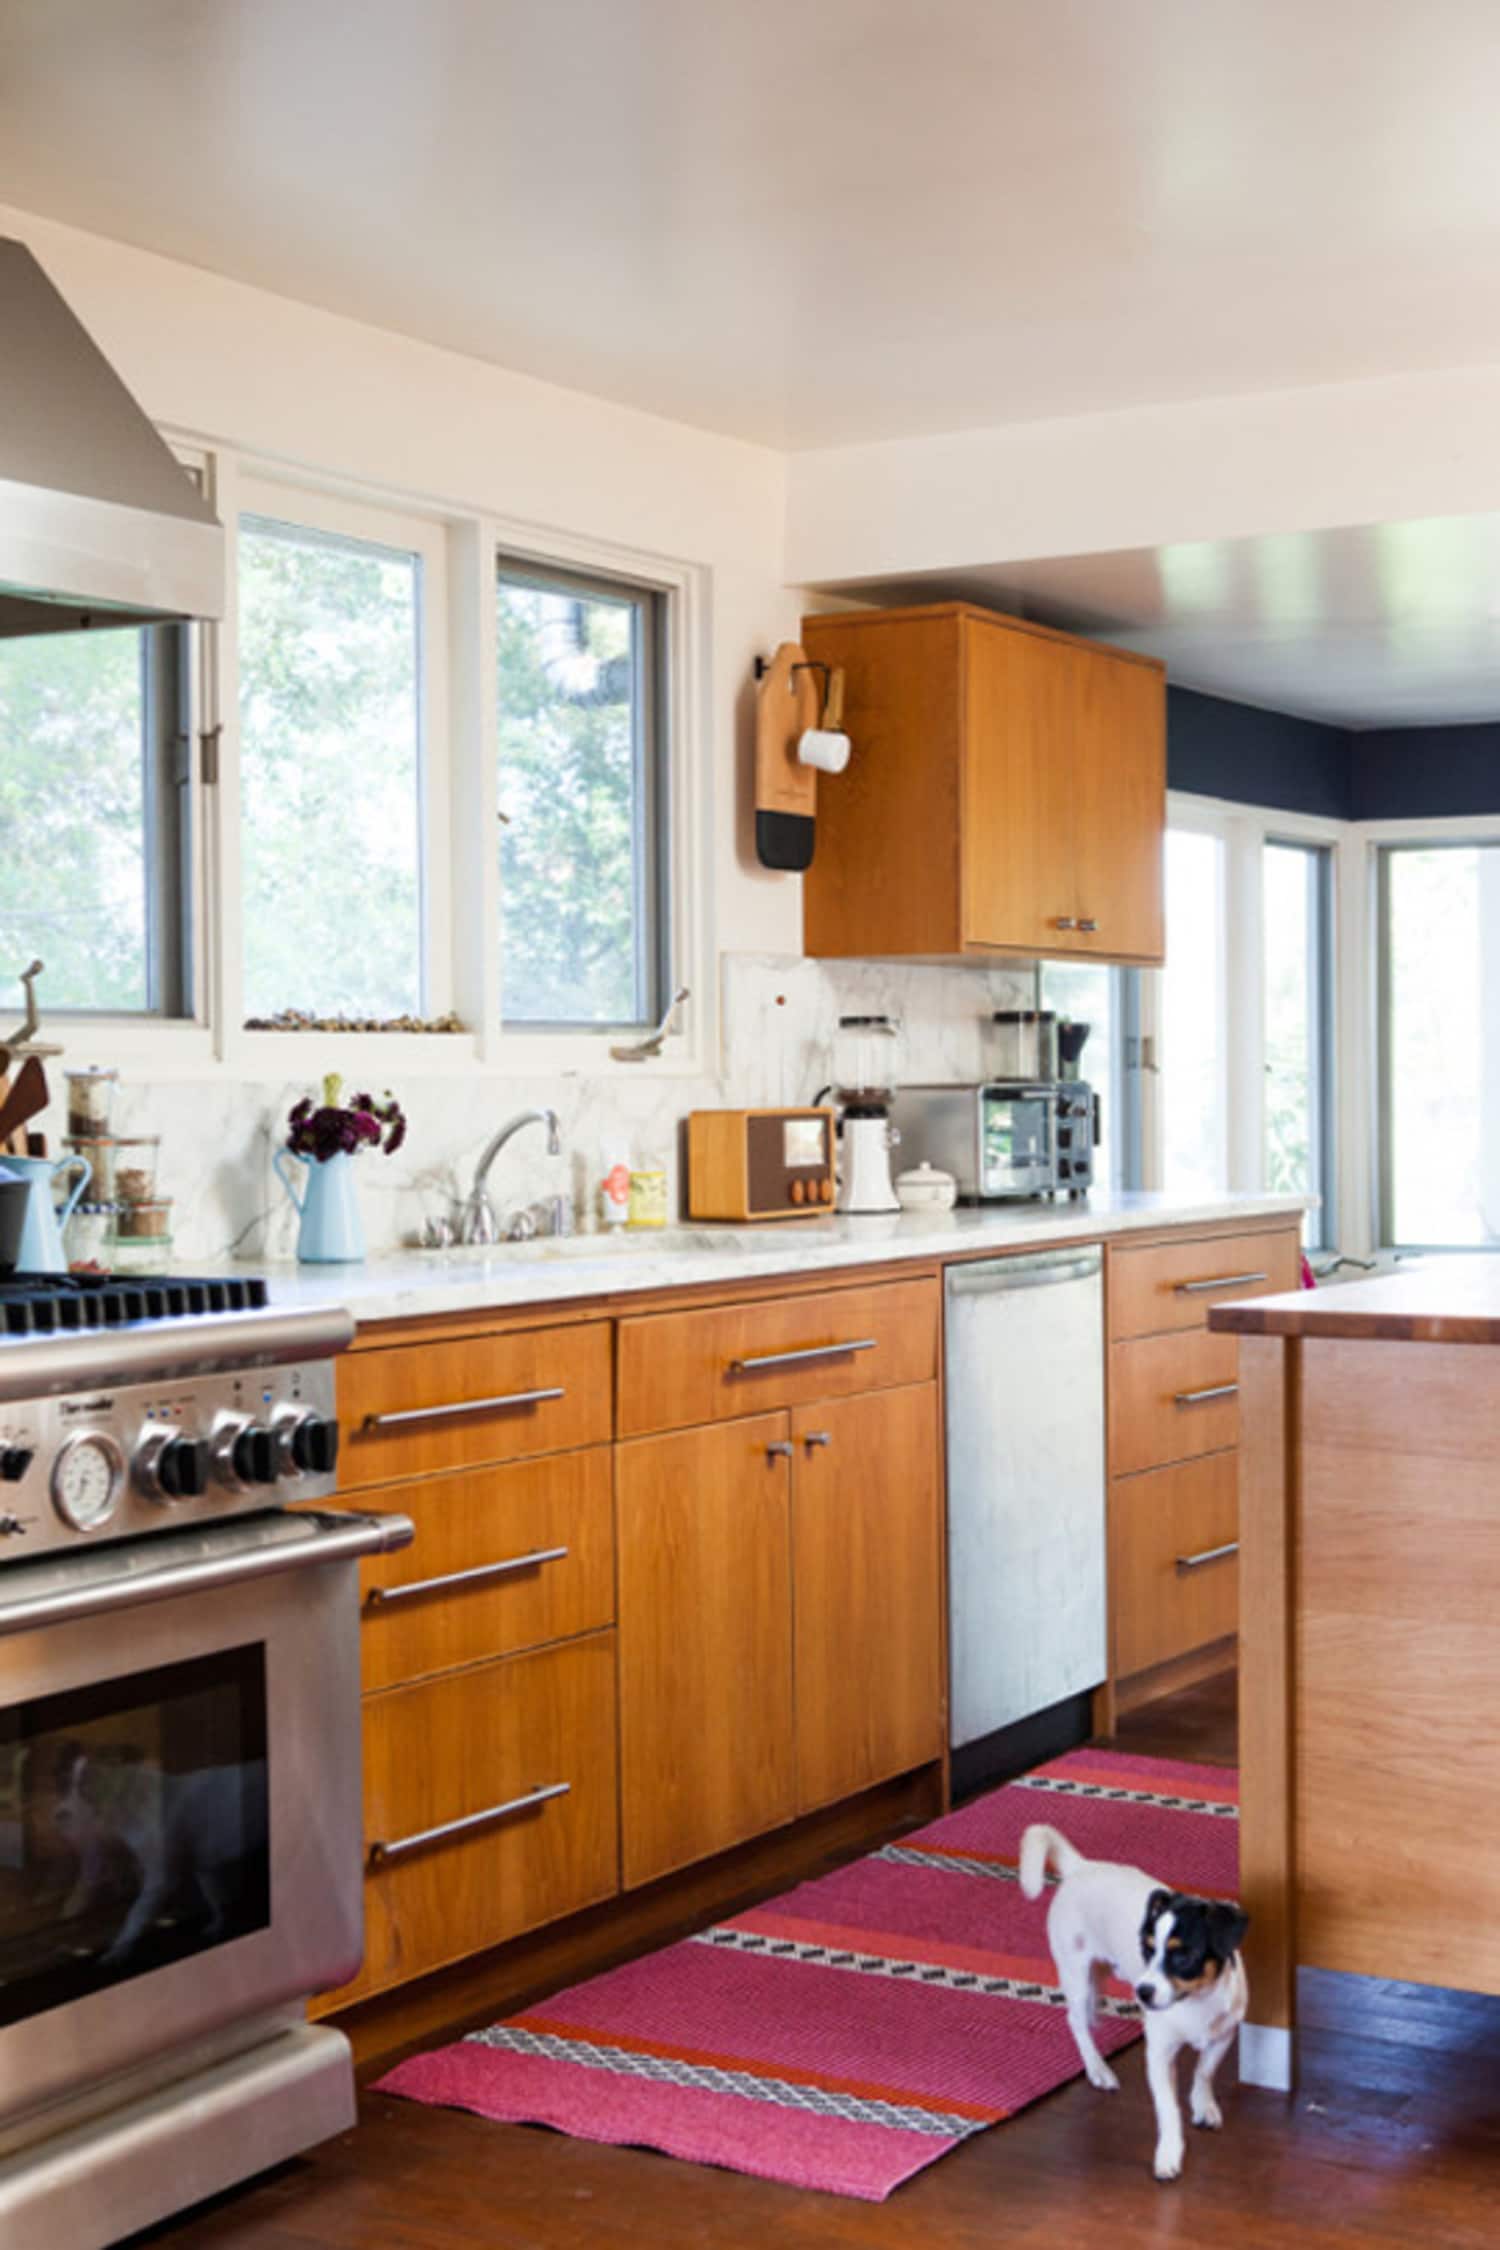 10 Easy, Low-Budget Ways to Improve Any Kitchen (Even a Rental!) | Kitchn